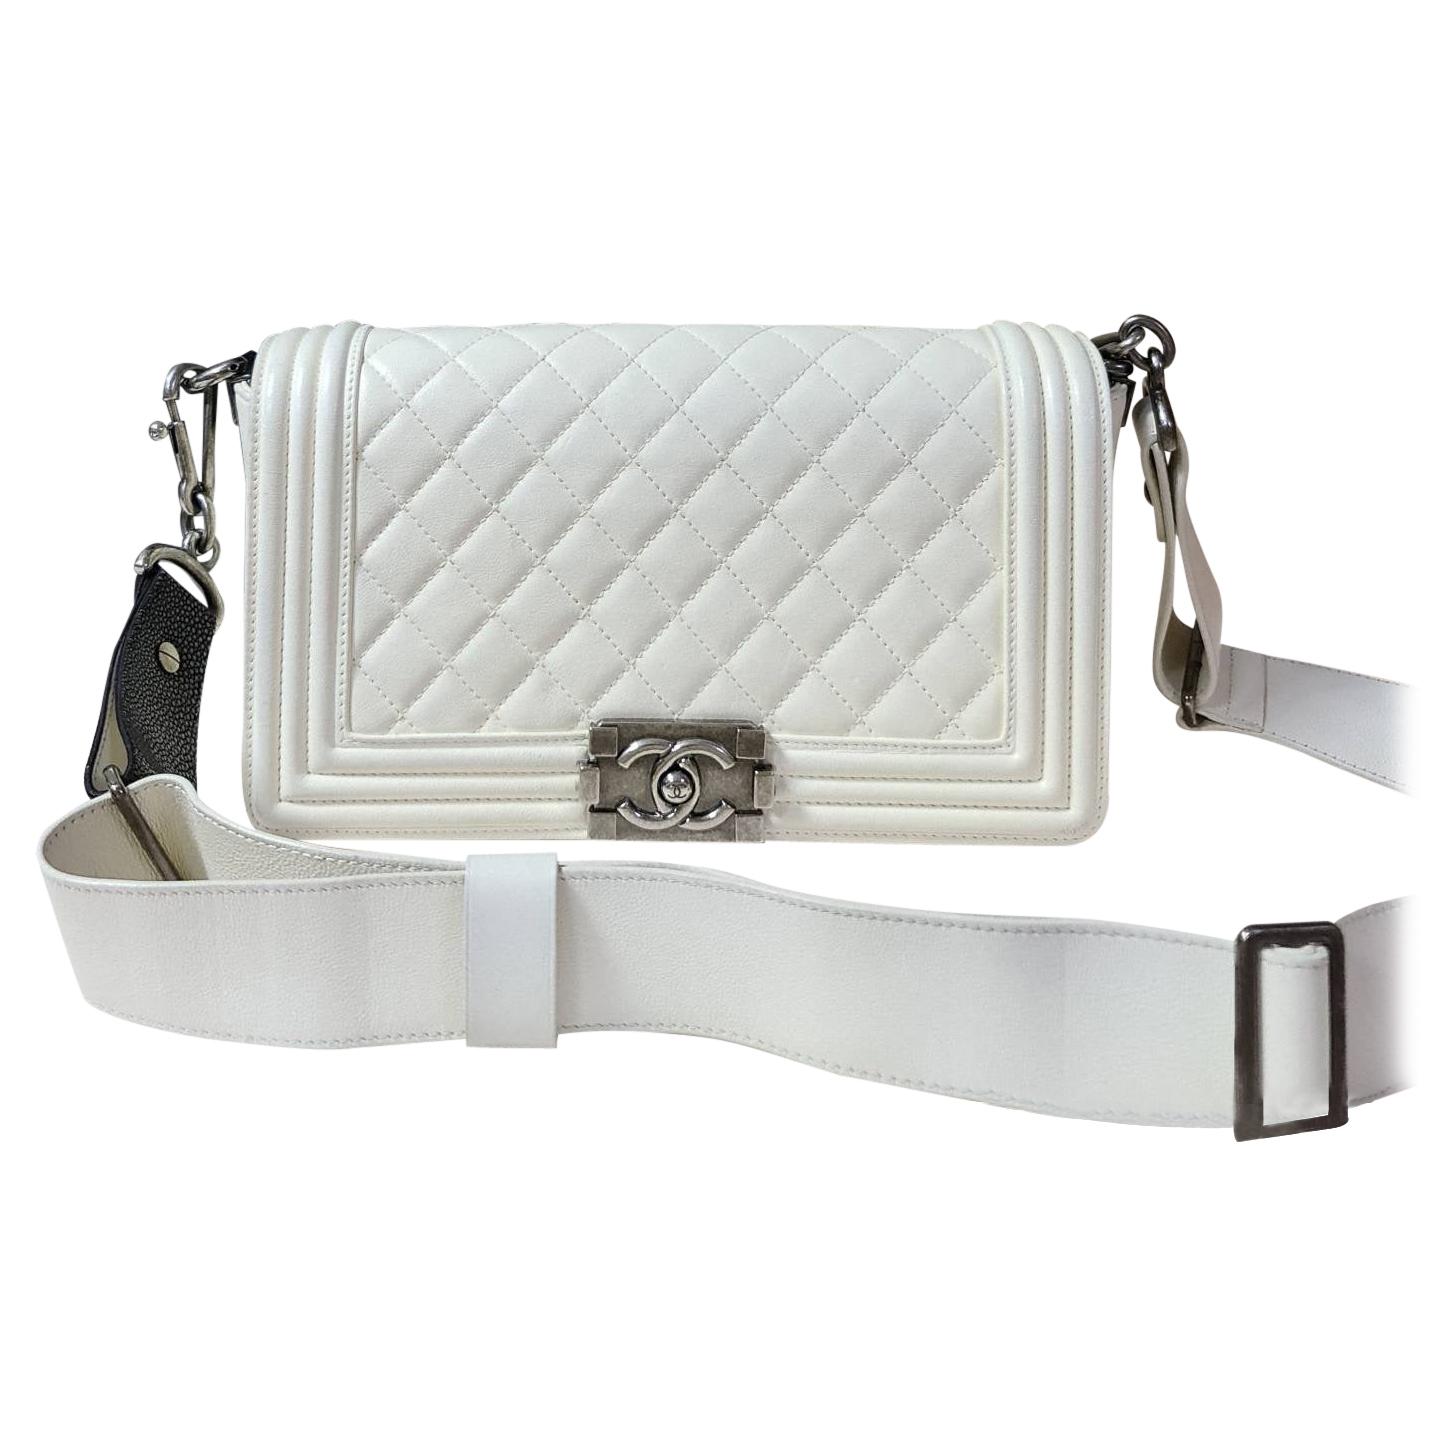 CHANEL Boy Flap with Stingray Lambskin Leather Shoulder Bag Silver